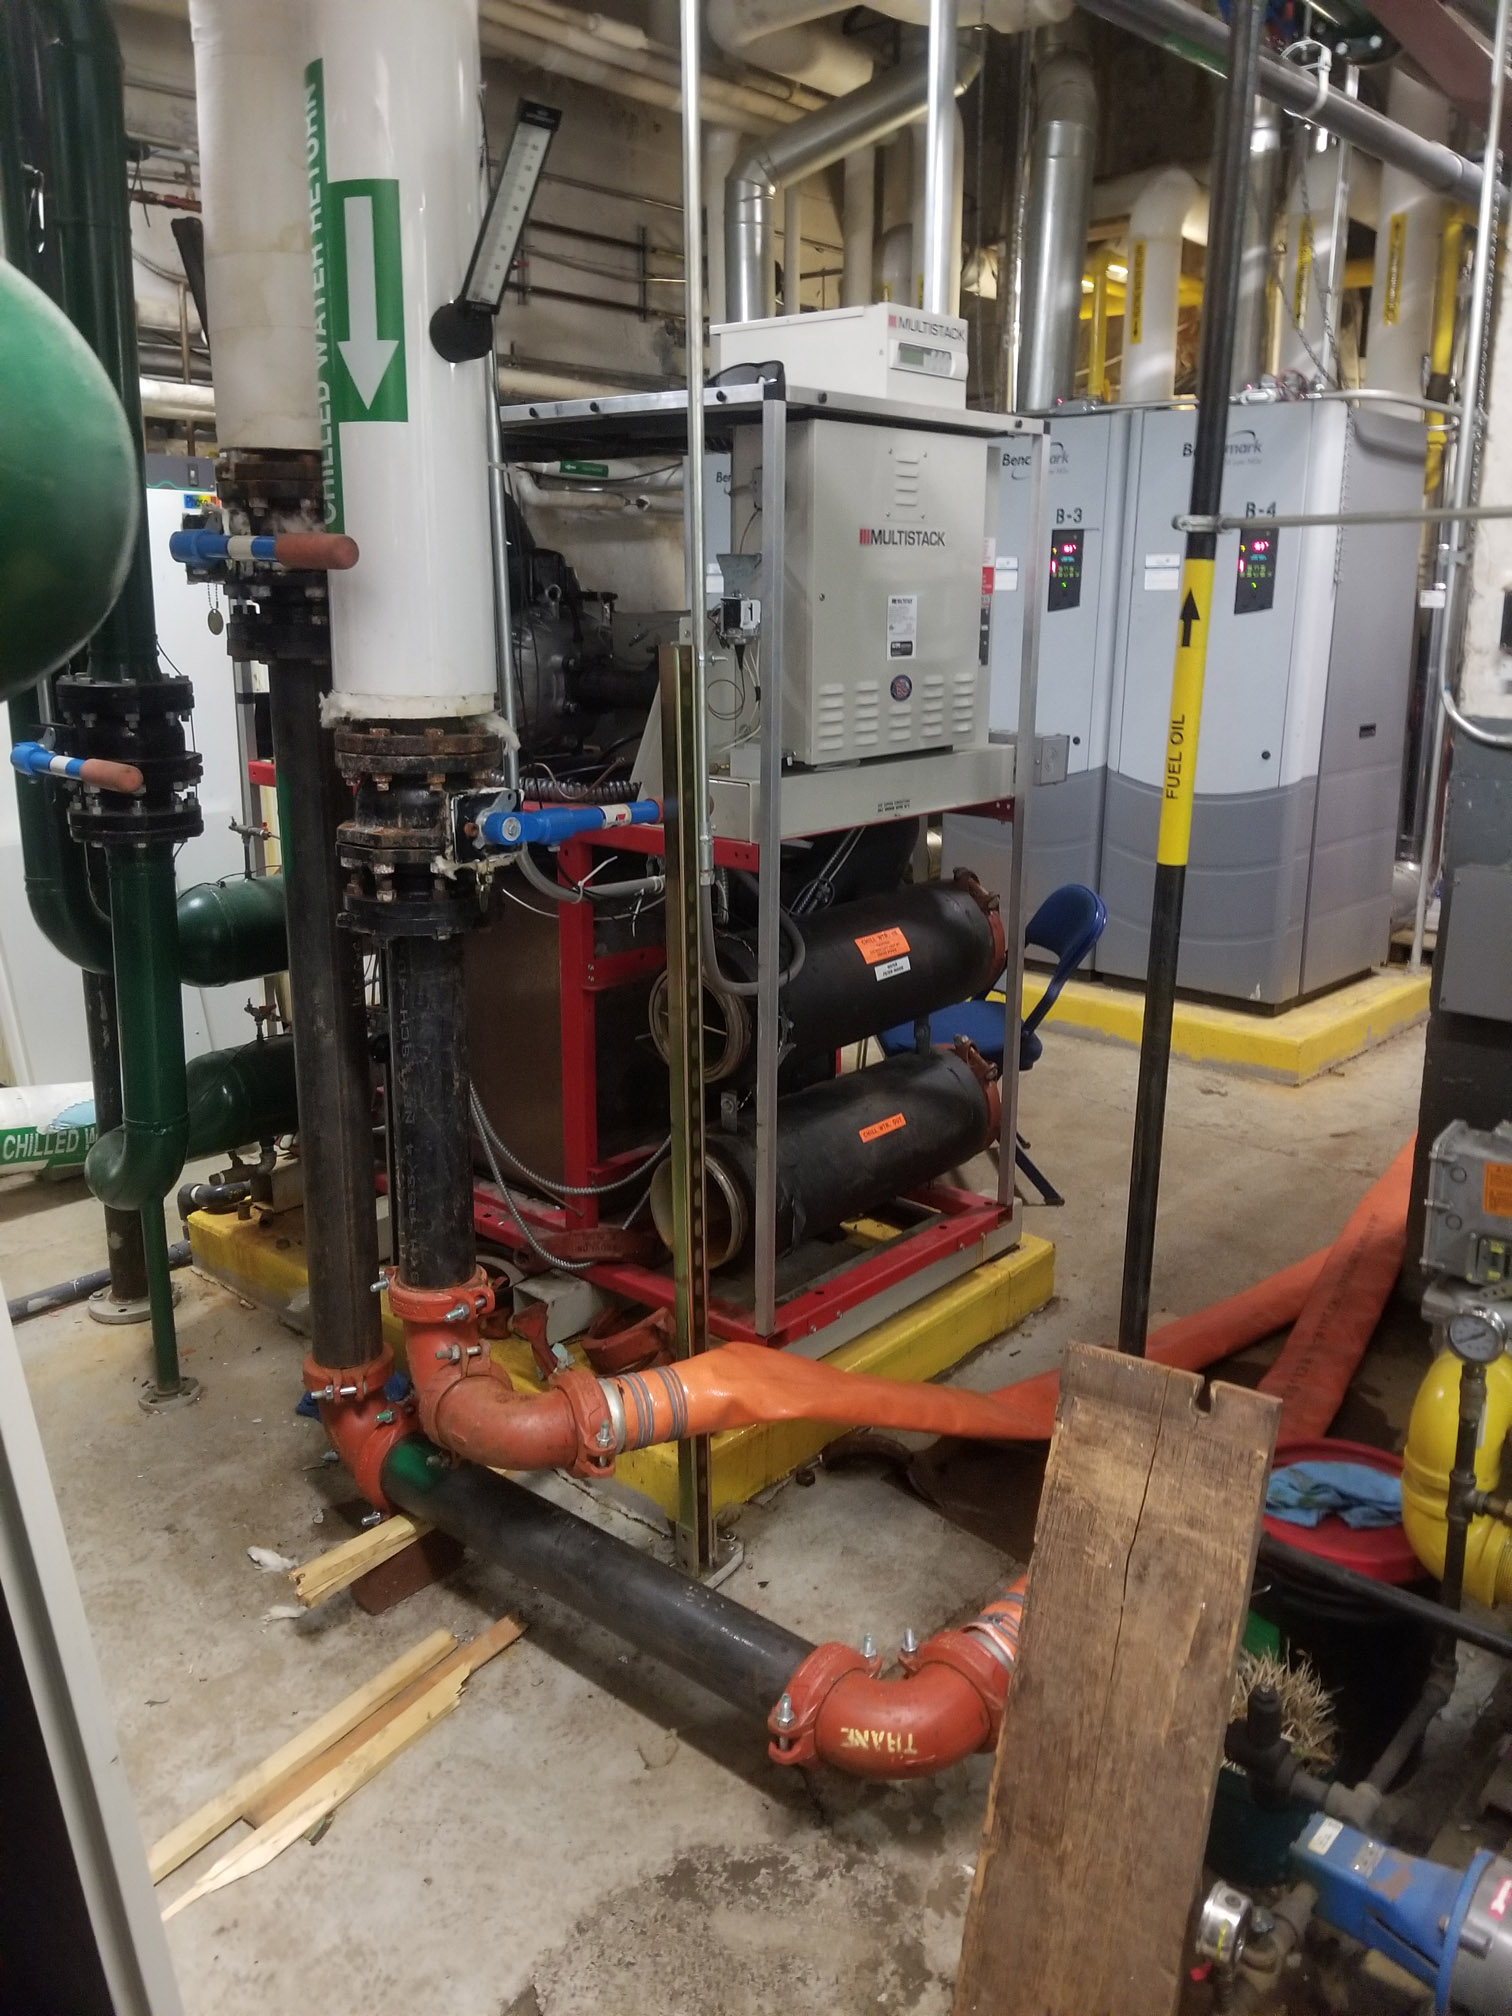 Air Cooled Chiller Rental Volusia County FL, Chiller AC Rental Volusia County FL, Temporary Chiller Volusia County FL, Rental Chiller Installation Volusia County FL